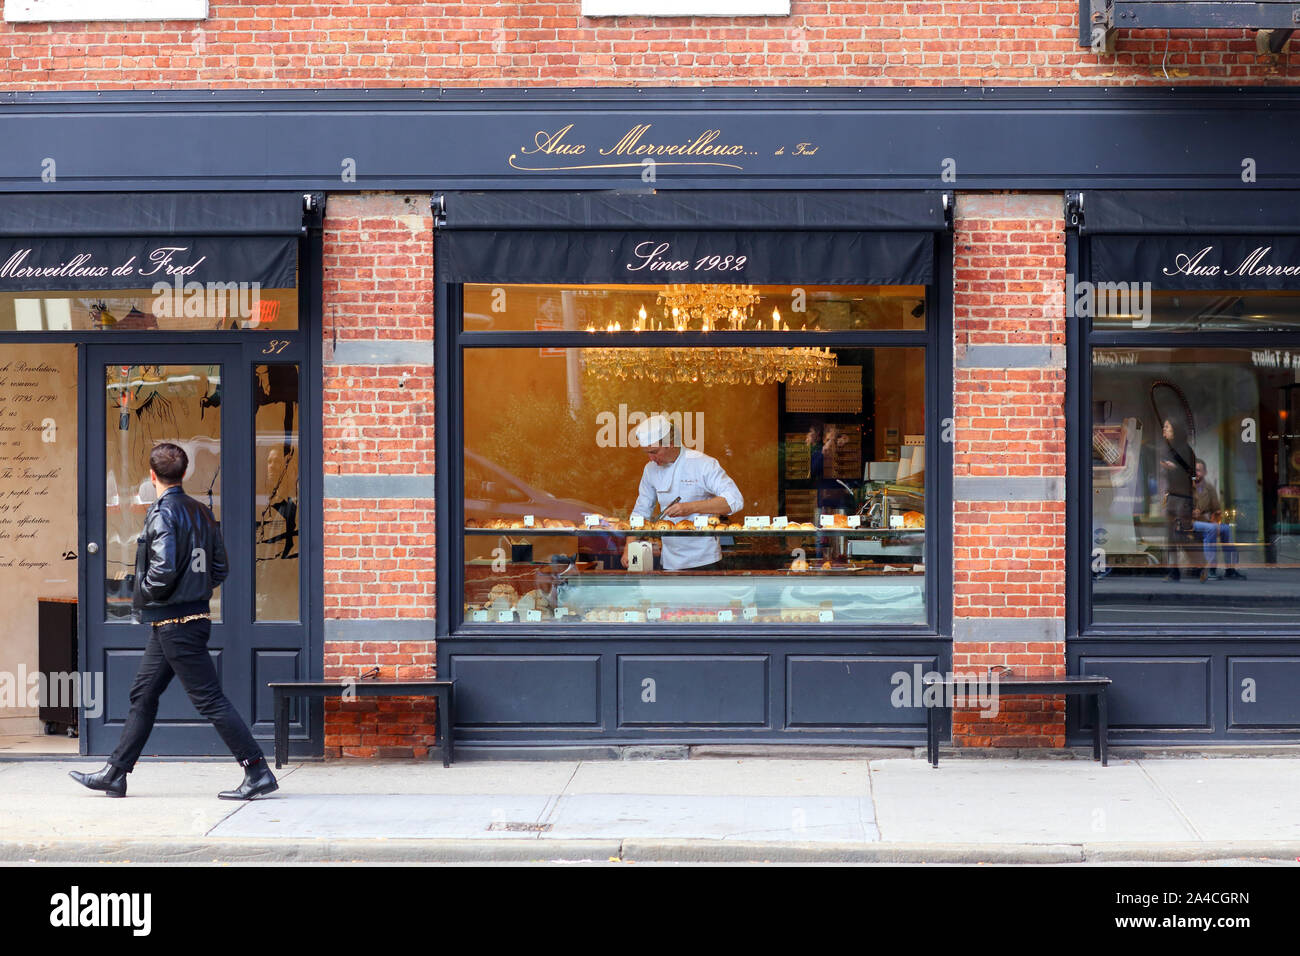 Aux Merveilleux de Fred, 37 Eighth Avenue, New York, NY. exterior storefront of a french pastry shop in Manhattan's Greenwich Village. Stock Photo